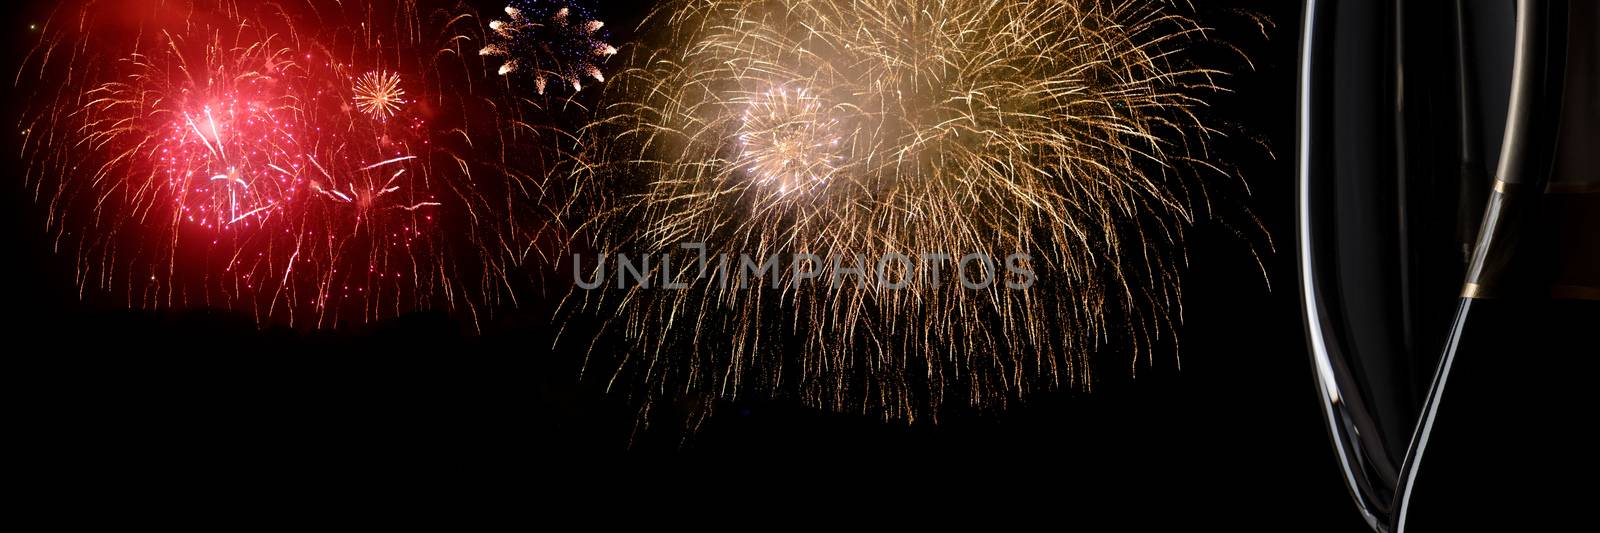 Image of two champagne glasses and fireworks